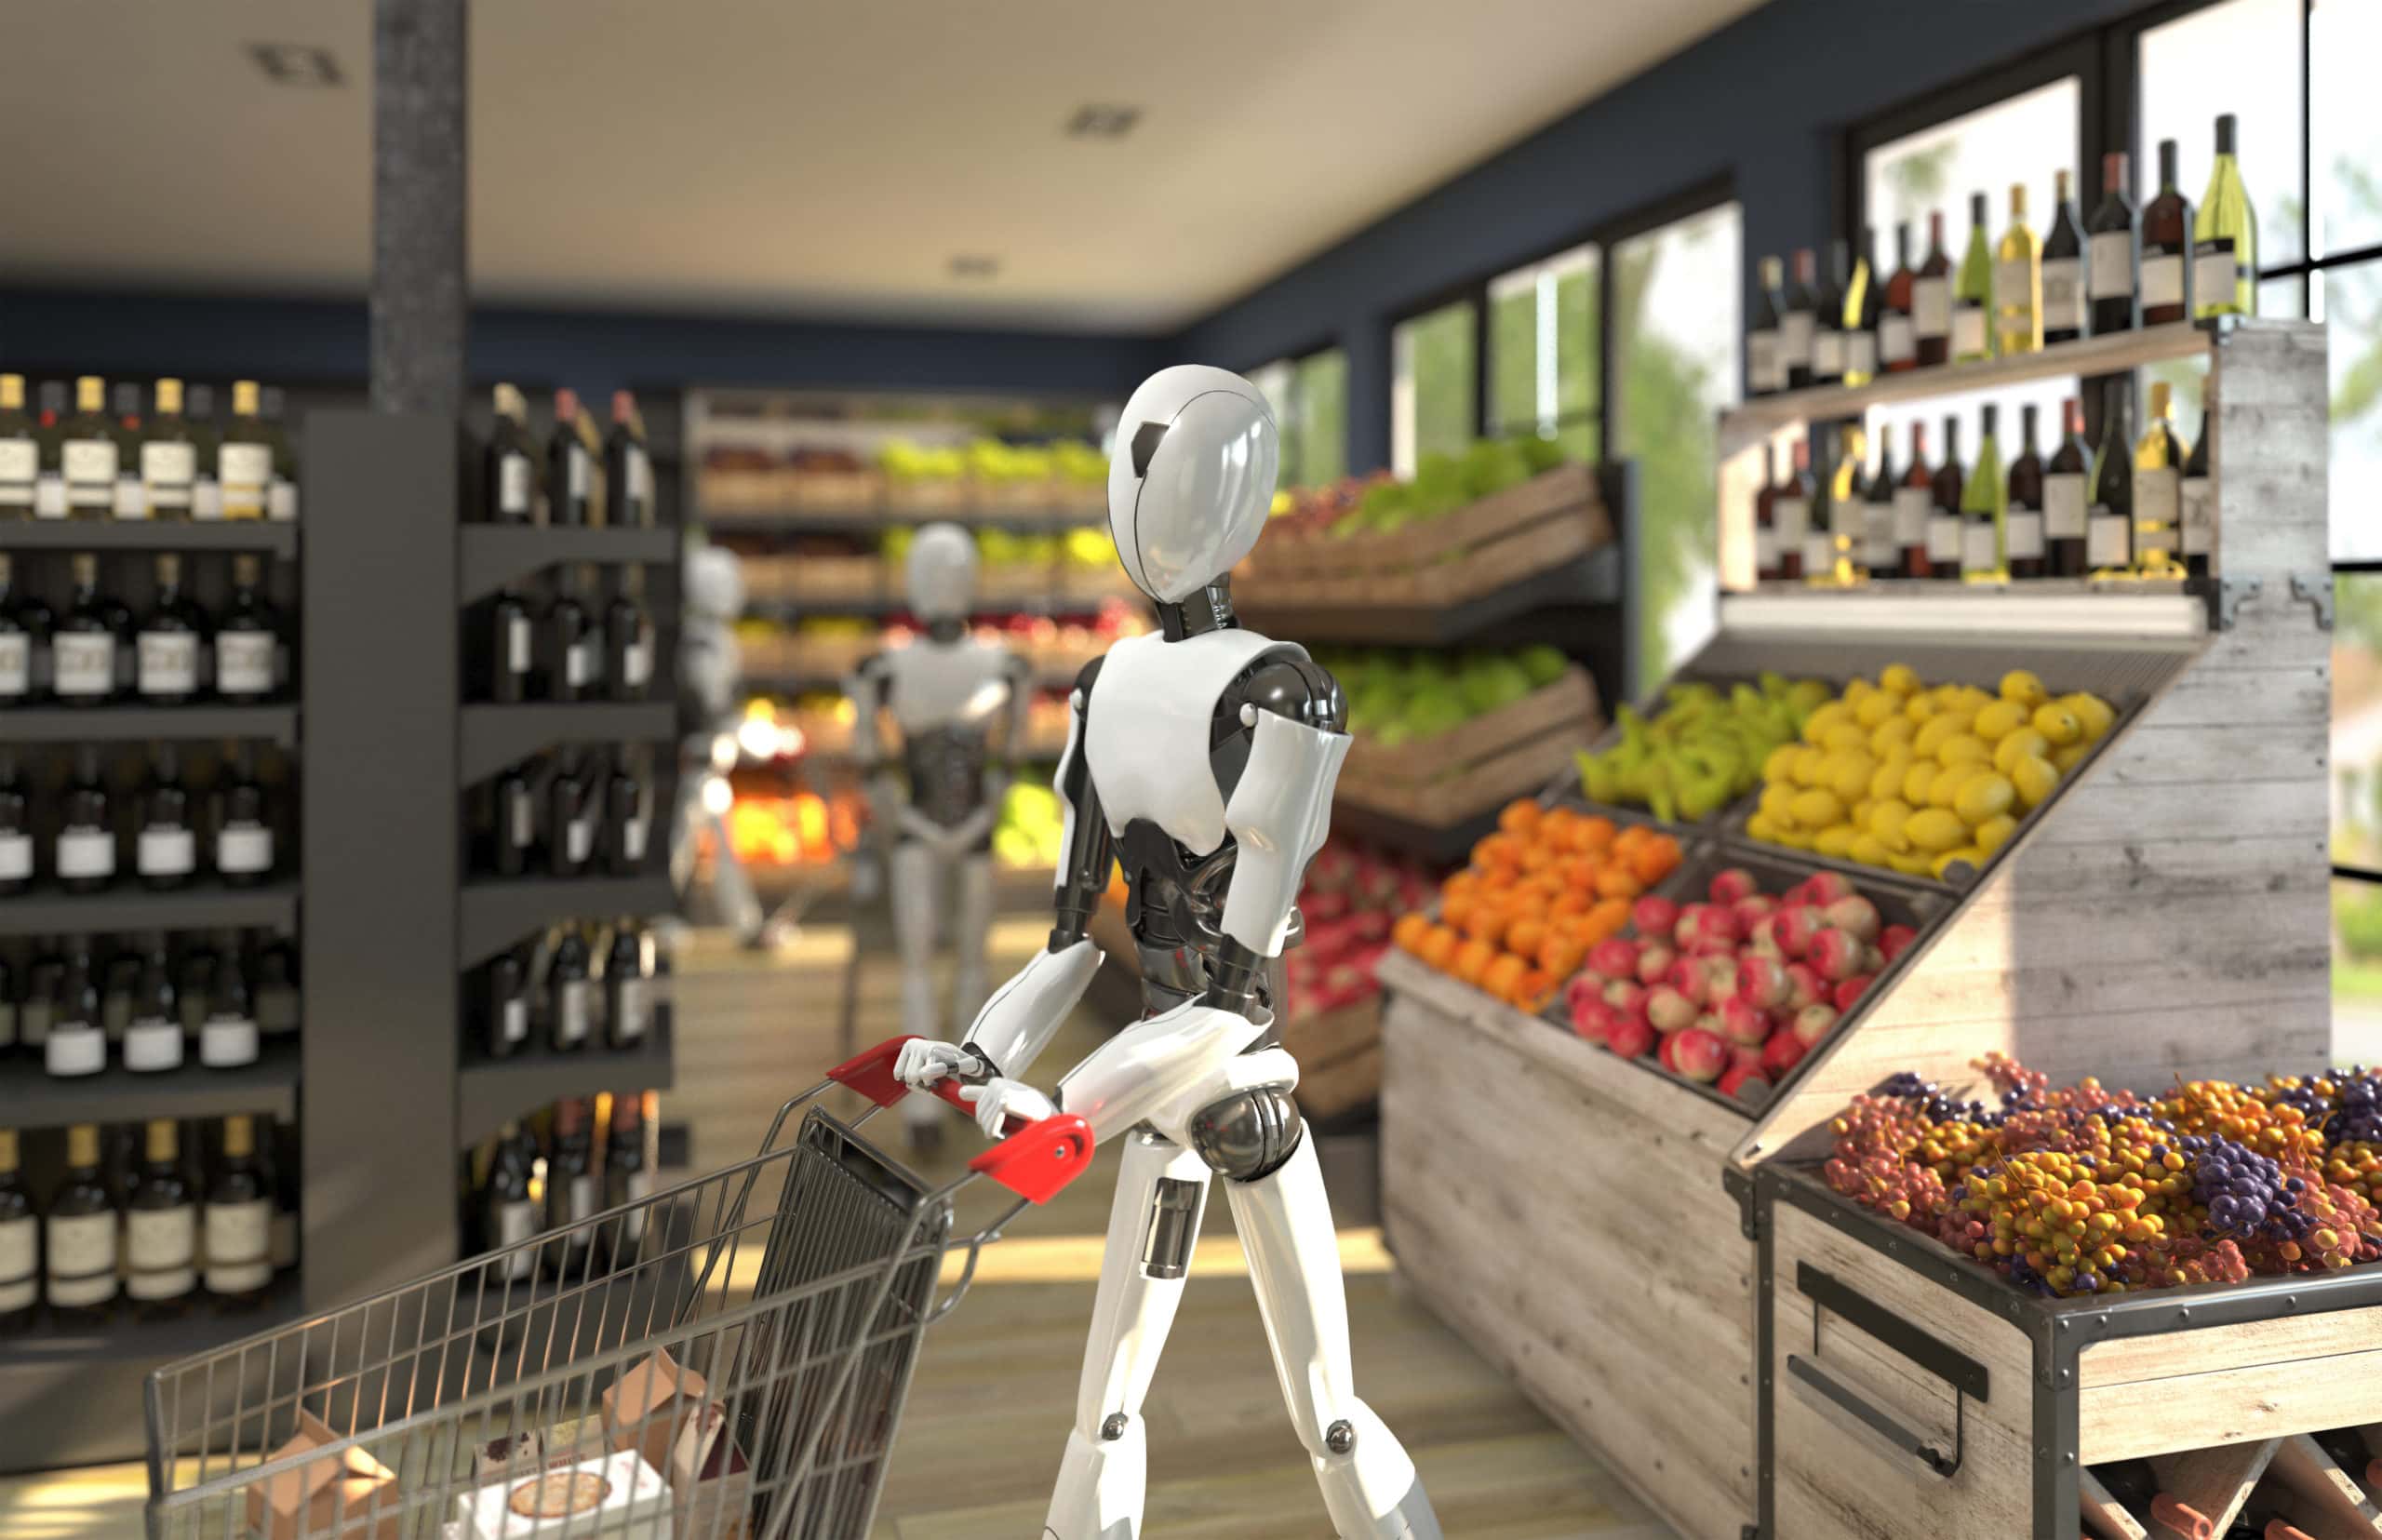 grocer - future formats